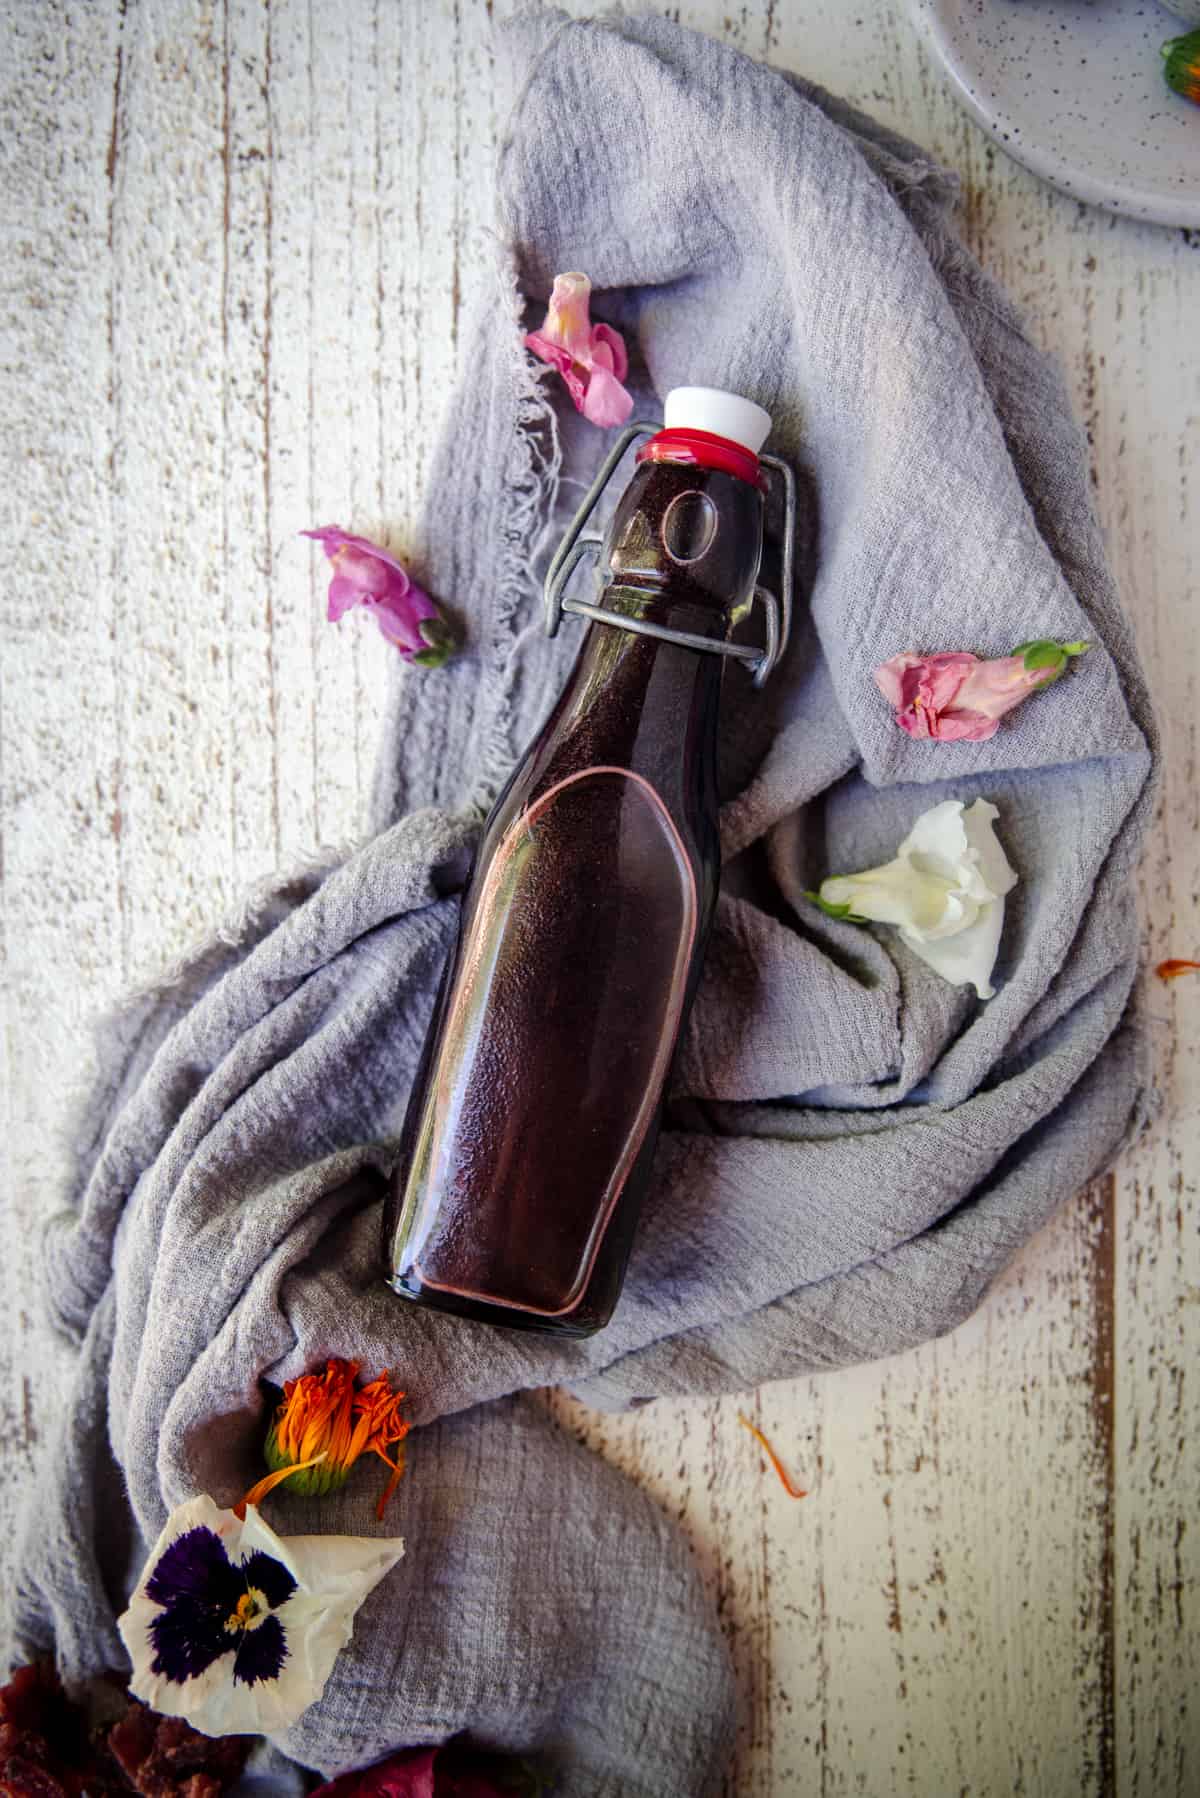 hibiscus syrup in a bottle with fresh flowers on linen